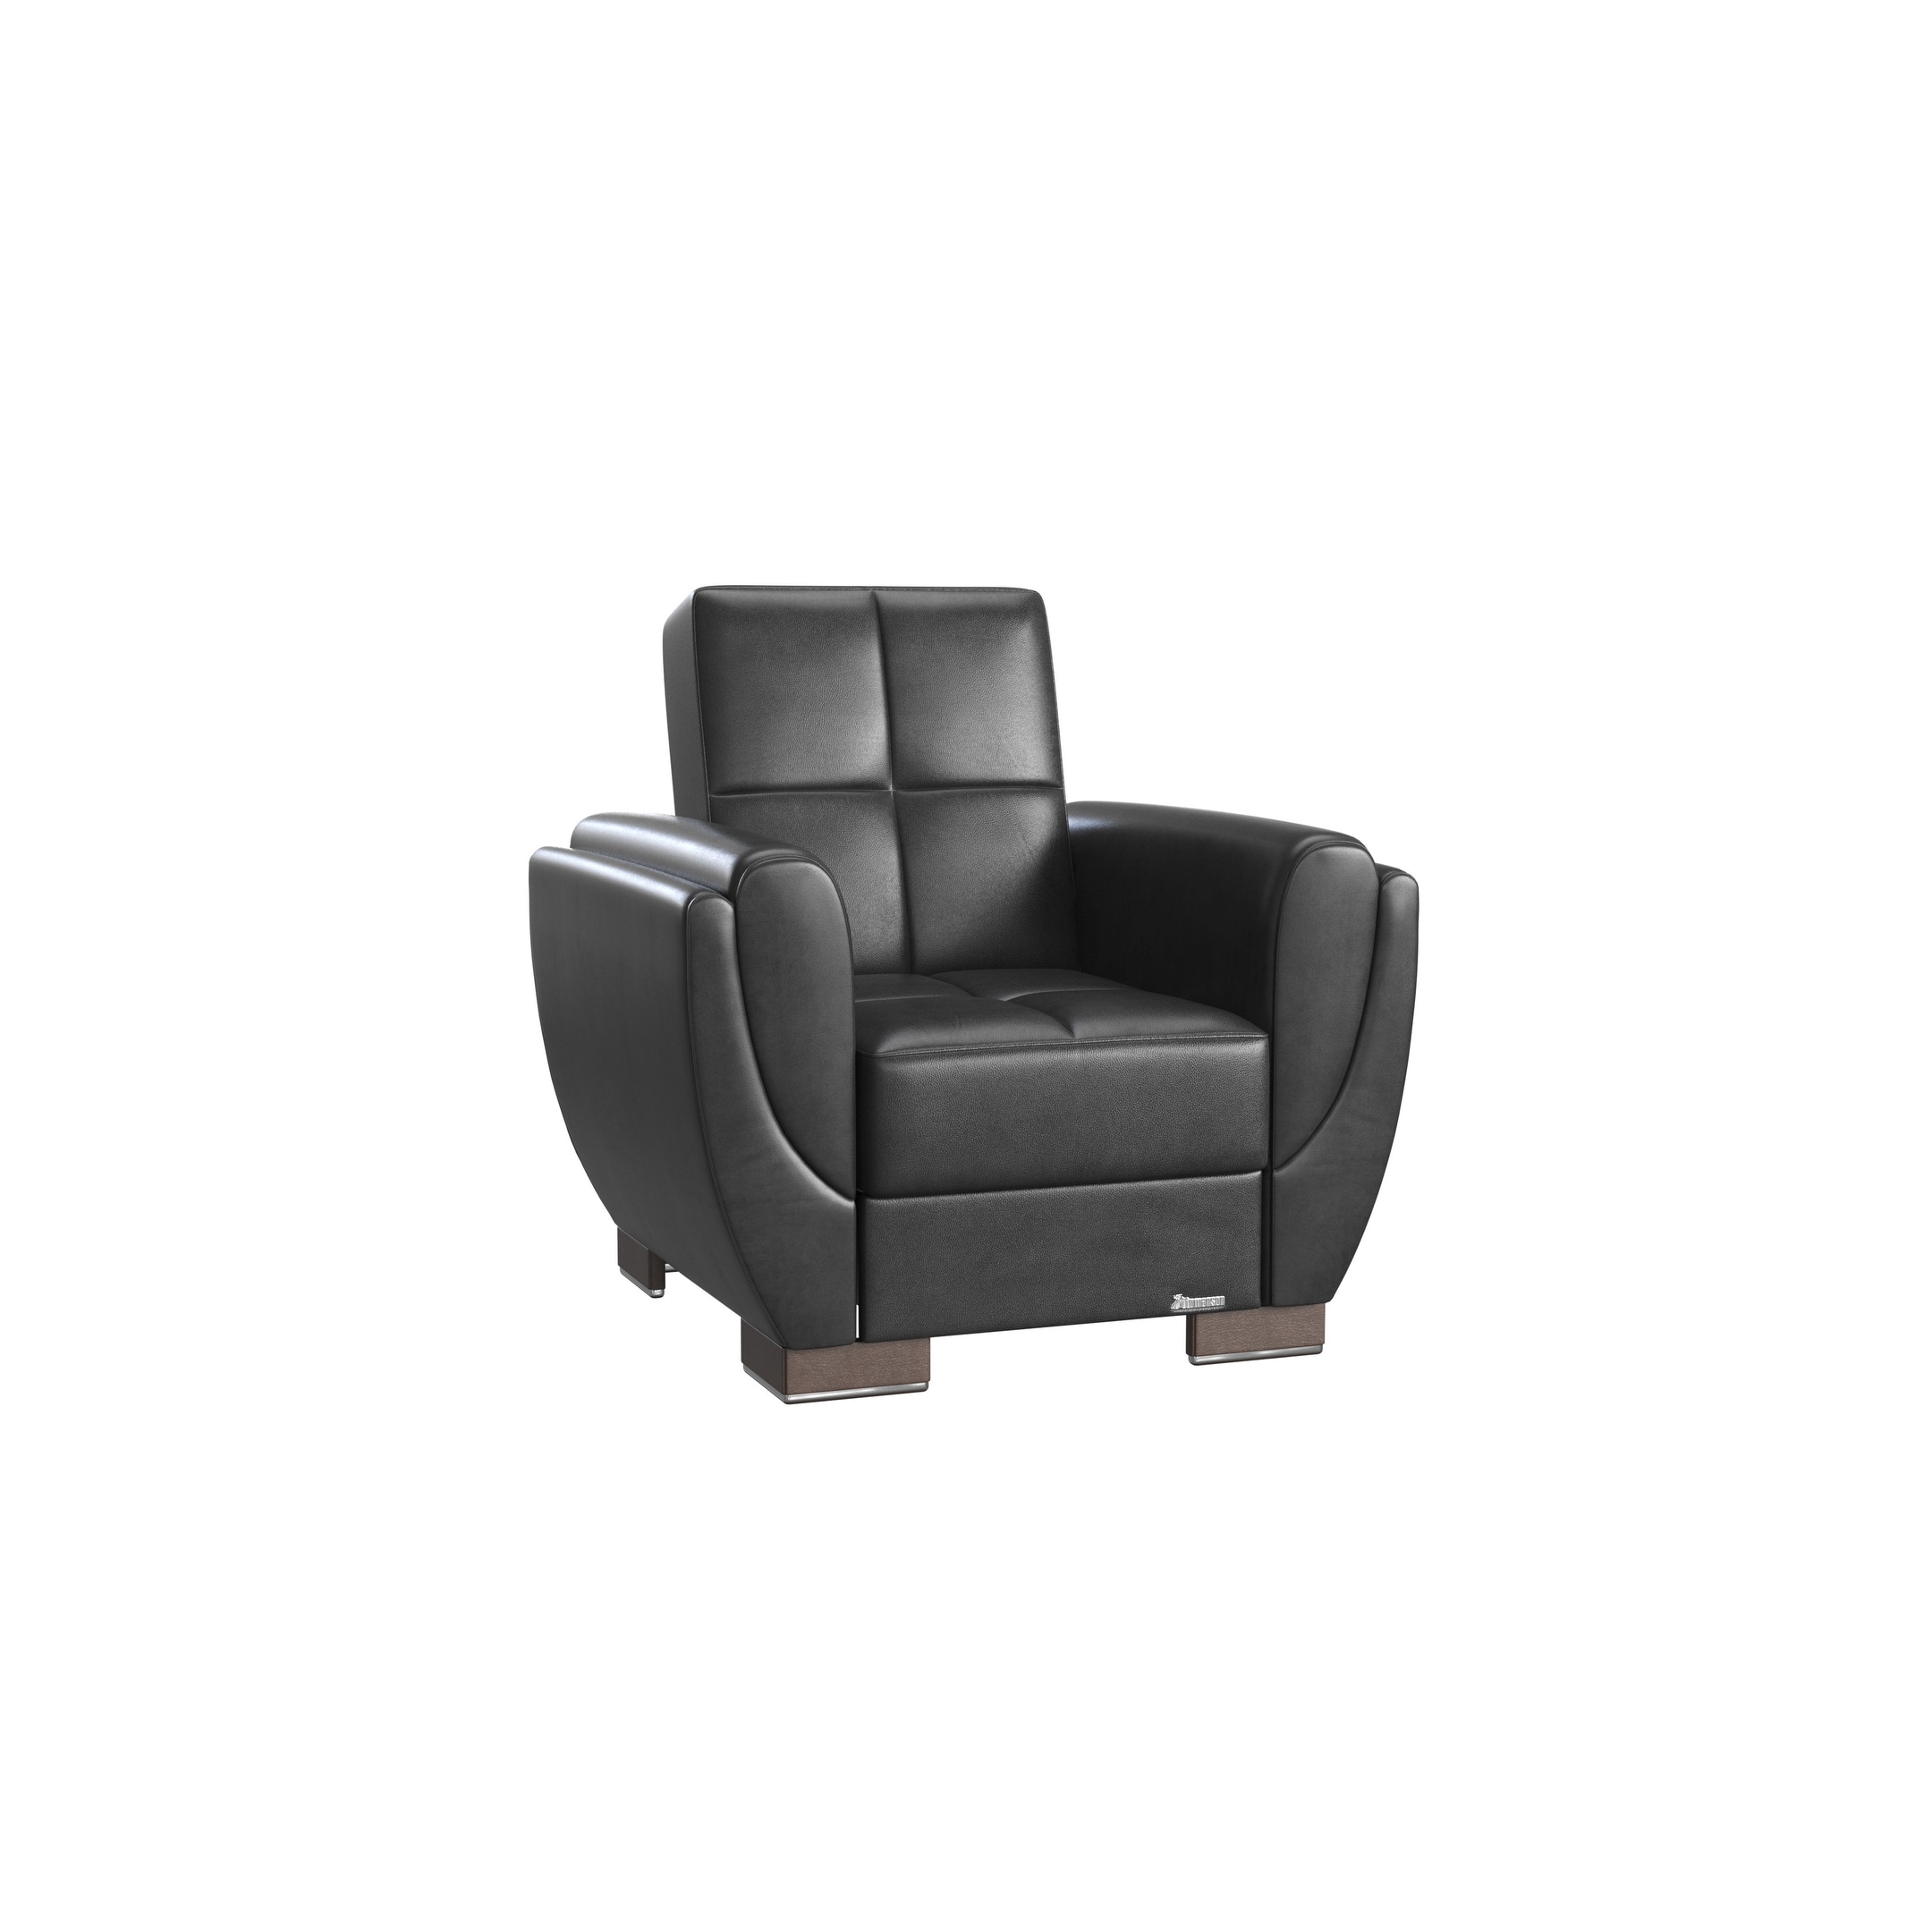 Homeroots 36 Black Faux Leather Tufted Convertible Chair - 36